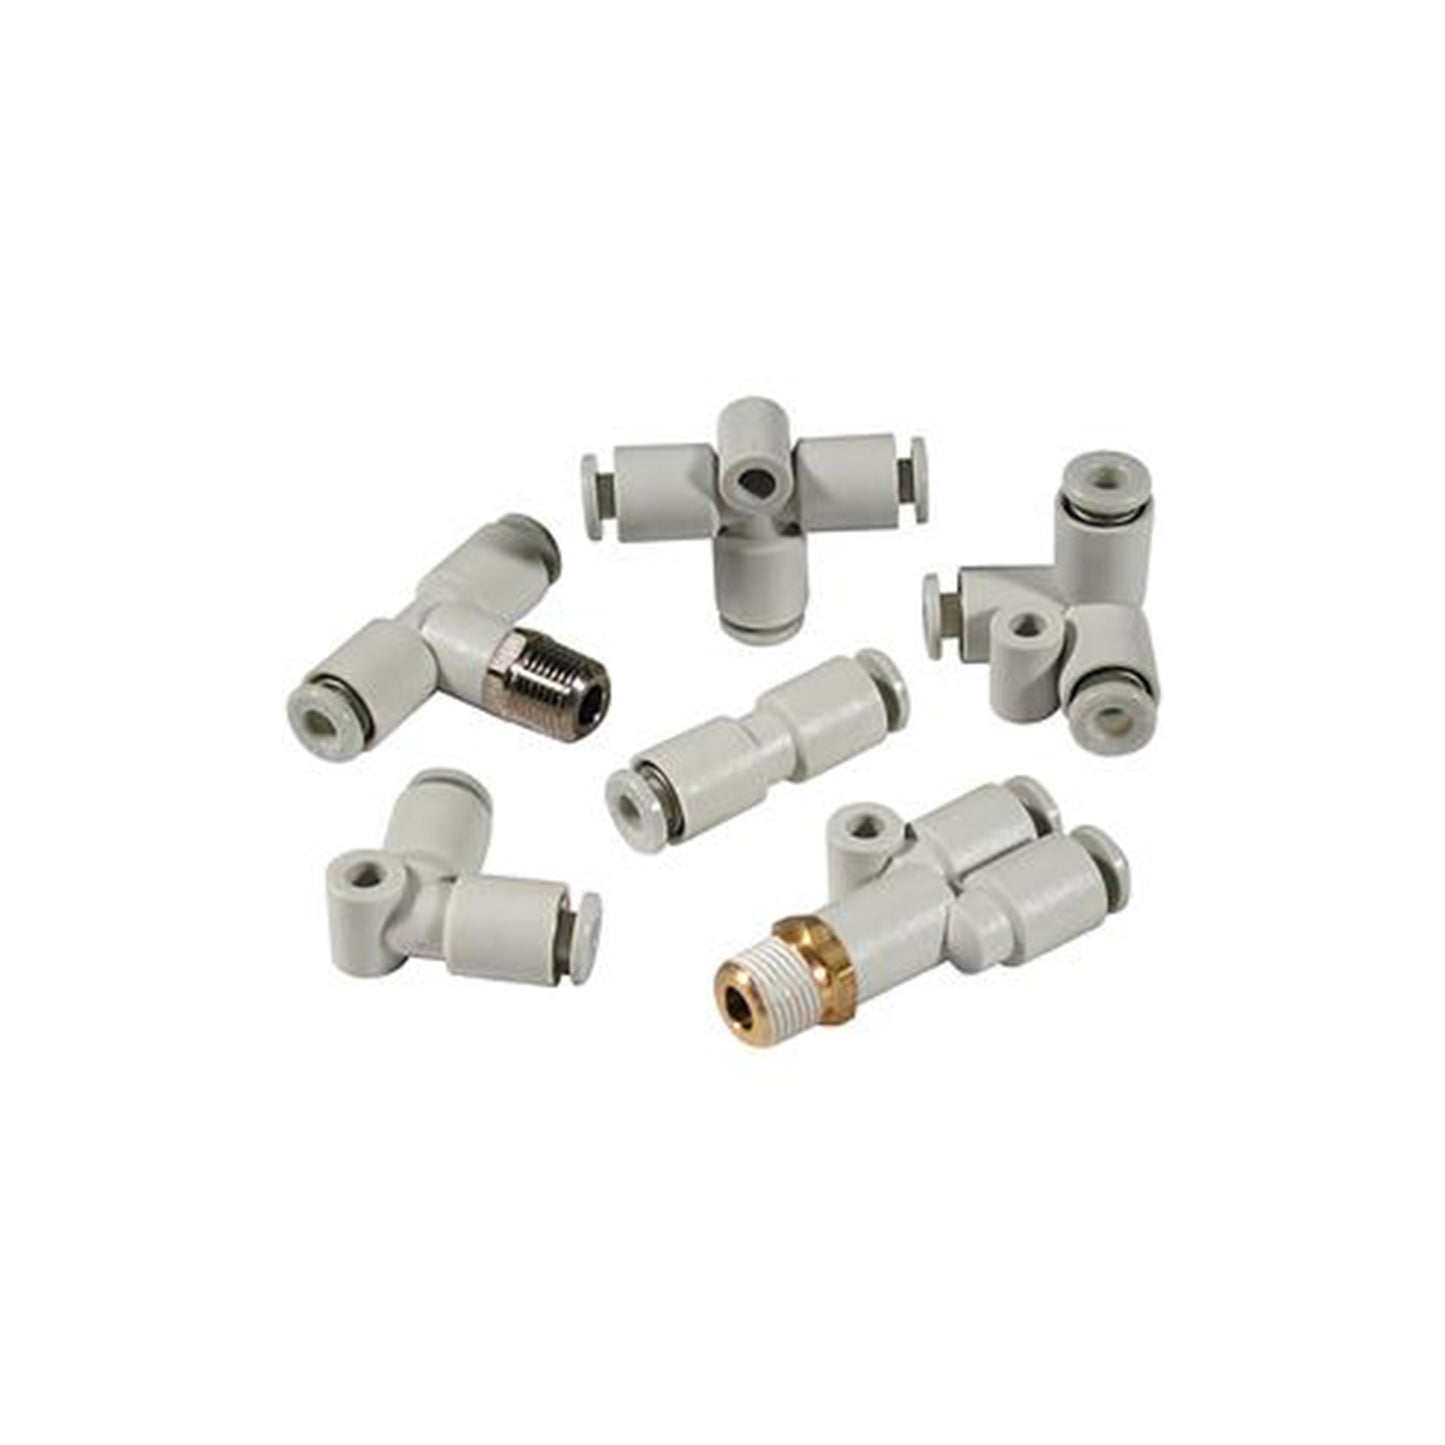 SMC KQ2H01-U02 | Unifit Male Connection Fitting